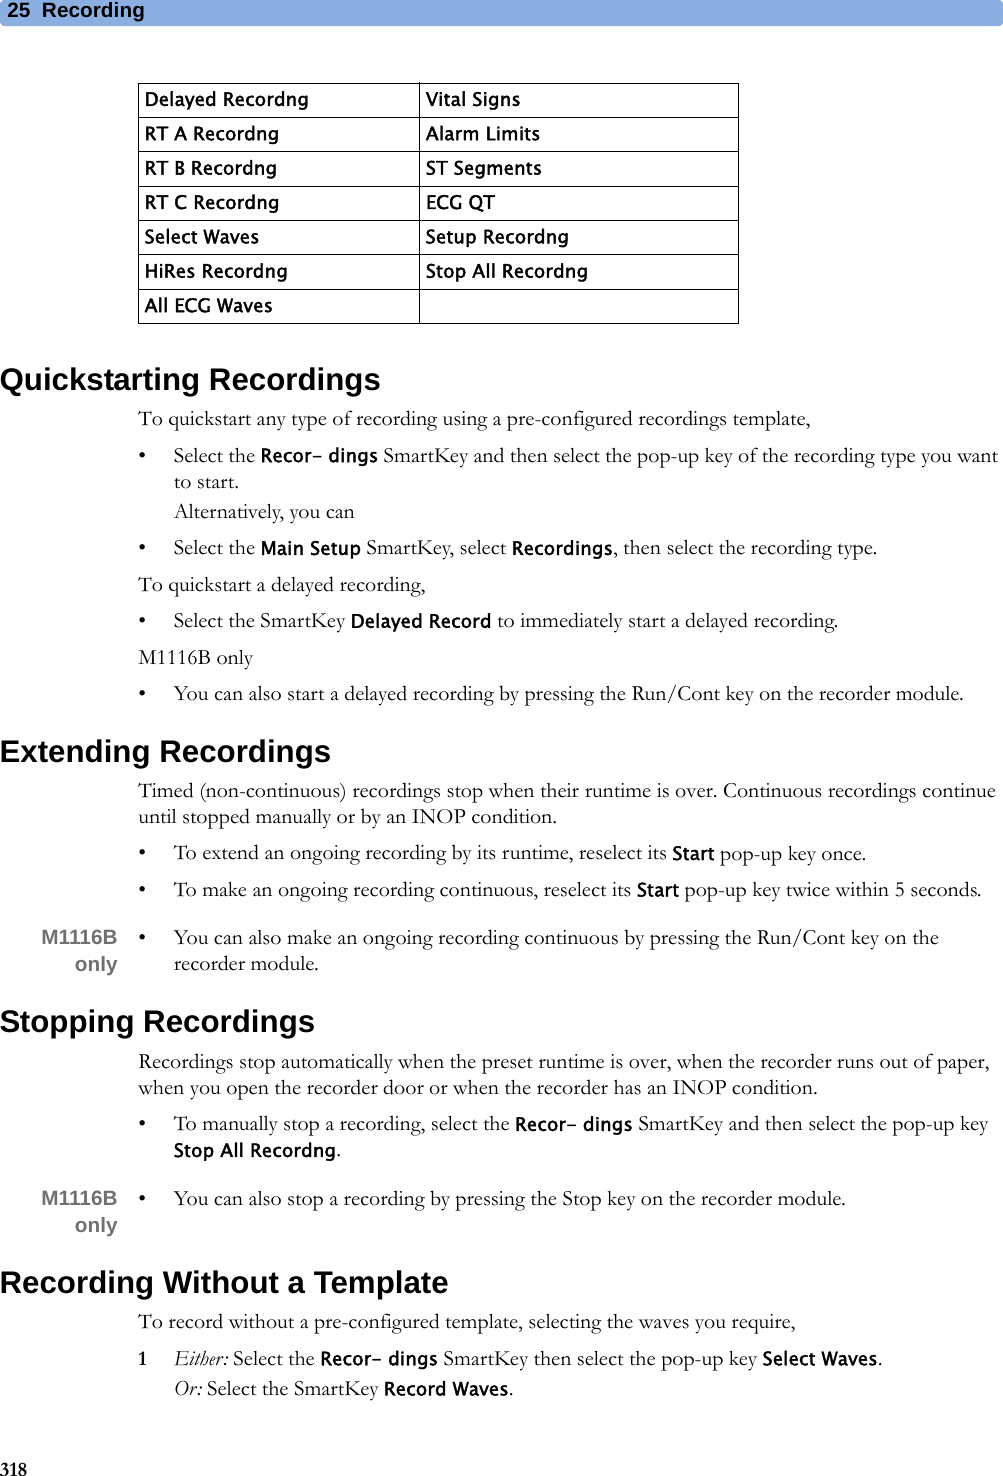 25 Recording318Quickstarting RecordingsTo quickstart any type of recording using a pre-configured recordings template,• Select the Recor- dings SmartKey and then select the pop-up key of the recording type you want to start.Alternatively, you can• Select the Main Setup SmartKey, select Recordings, then select the recording type.To quickstart a delayed recording,• Select the SmartKey Delayed Record to immediately start a delayed recording.M1116B only• You can also start a delayed recording by pressing the Run/Cont key on the recorder module.Extending RecordingsTimed (non-continuous) recordings stop when their runtime is over. Continuous recordings continue until stopped manually or by an INOP condition.• To extend an ongoing recording by its runtime, reselect its Start pop-up key once.• To make an ongoing recording continuous, reselect its Start pop-up key twice within 5 seconds.M1116Bonly • You can also make an ongoing recording continuous by pressing the Run/Cont key on the recorder module.Stopping RecordingsRecordings stop automatically when the preset runtime is over, when the recorder runs out of paper, when you open the recorder door or when the recorder has an INOP condition.• To manually stop a recording, select the Recor- dings SmartKey and then select the pop-up key Stop All Recordng.M1116Bonly • You can also stop a recording by pressing the Stop key on the recorder module.Recording Without a TemplateTo record without a pre-configured template, selecting the waves you require,1Either: Select the Recor- dings SmartKey then select the pop-up key Select Waves.Or: Select the SmartKey Record Waves.Delayed Recordng Vital SignsRT A Recordng Alarm LimitsRT B Recordng ST SegmentsRT C Recordng ECG QTSelect Waves Setup RecordngHiRes Recordng Stop All RecordngAll ECG Waves